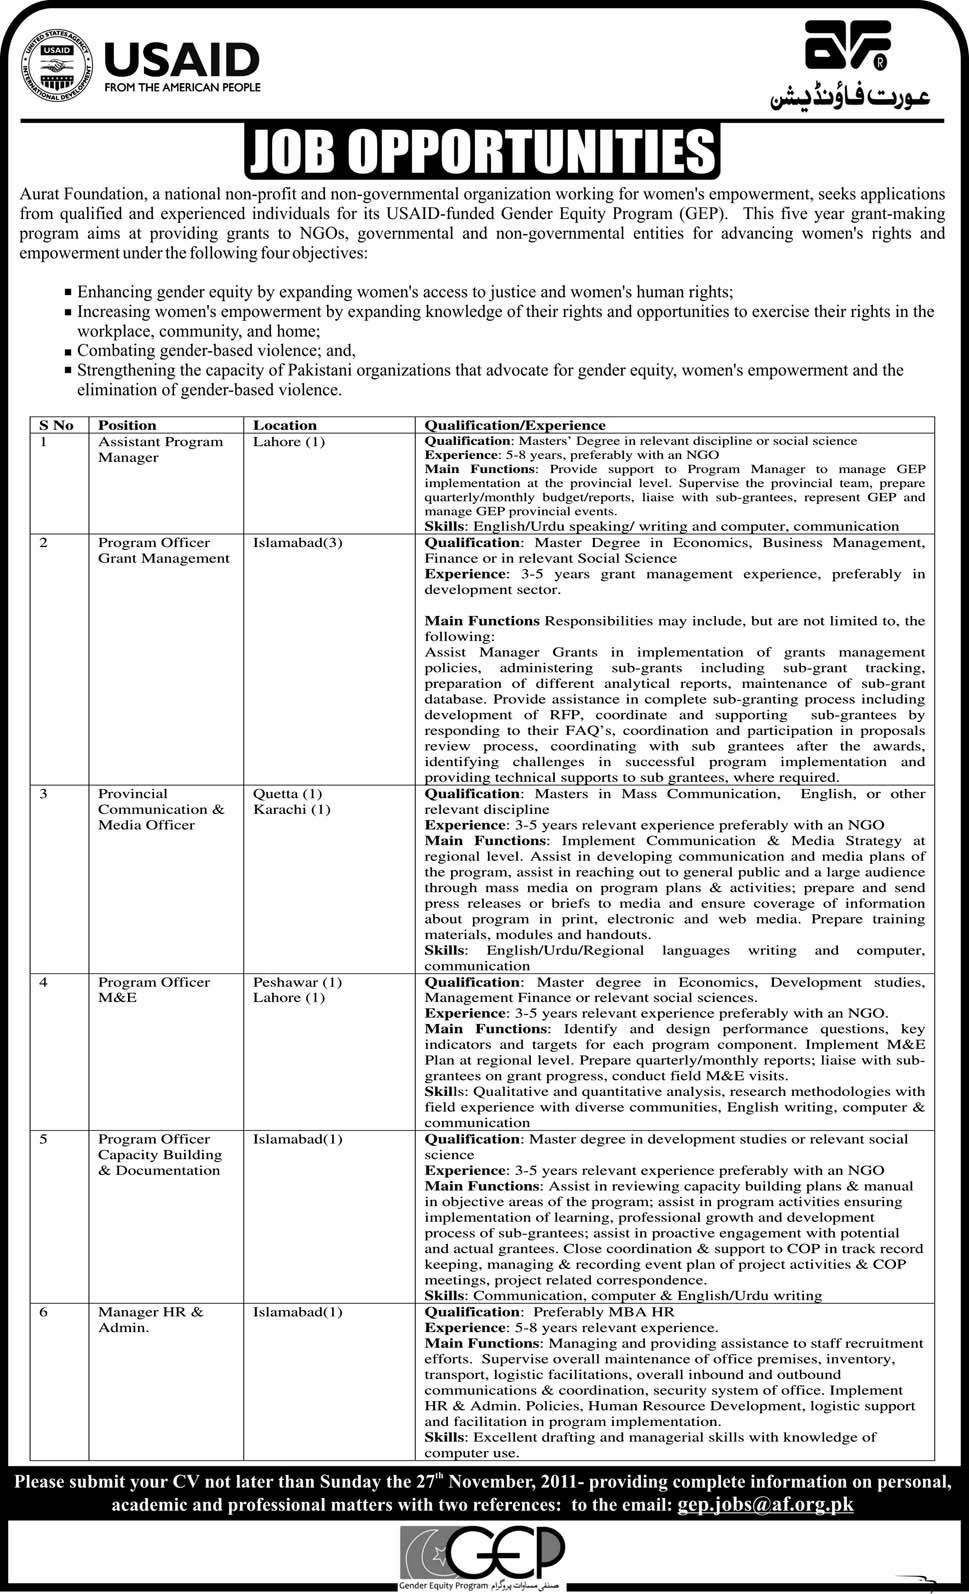 USAID Job Opportunities